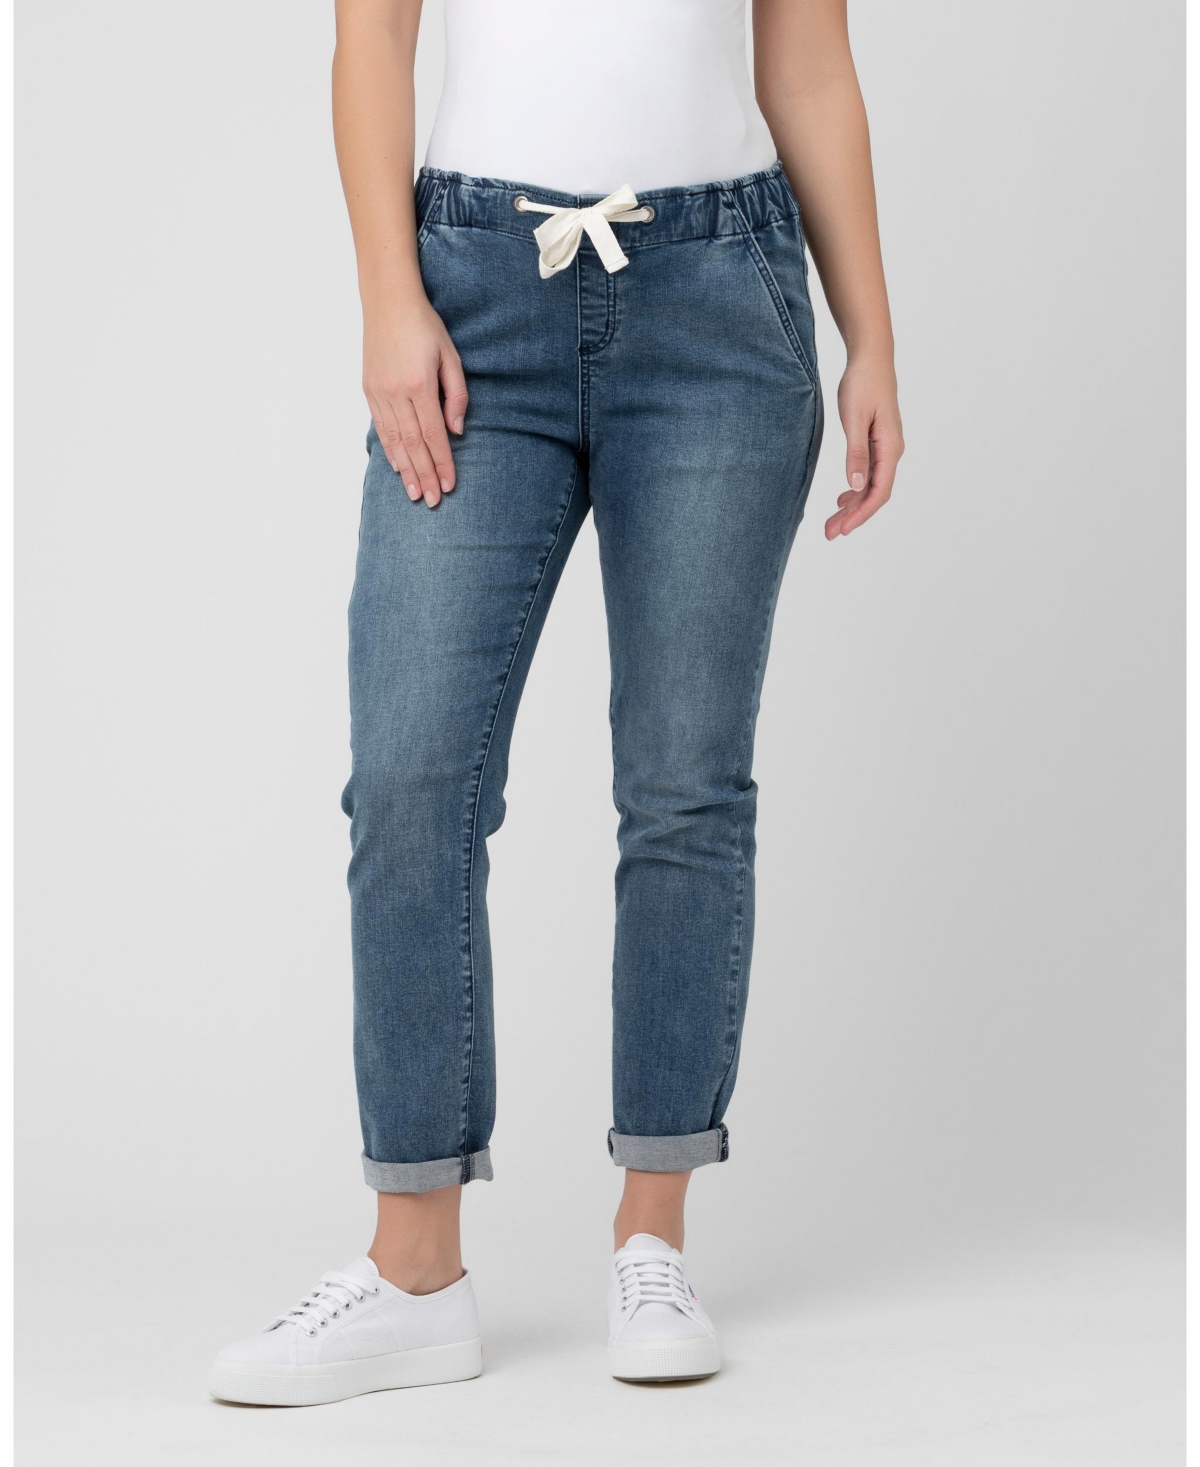 Maternity Comfy Denim Jogger with Tie Blue - Blue